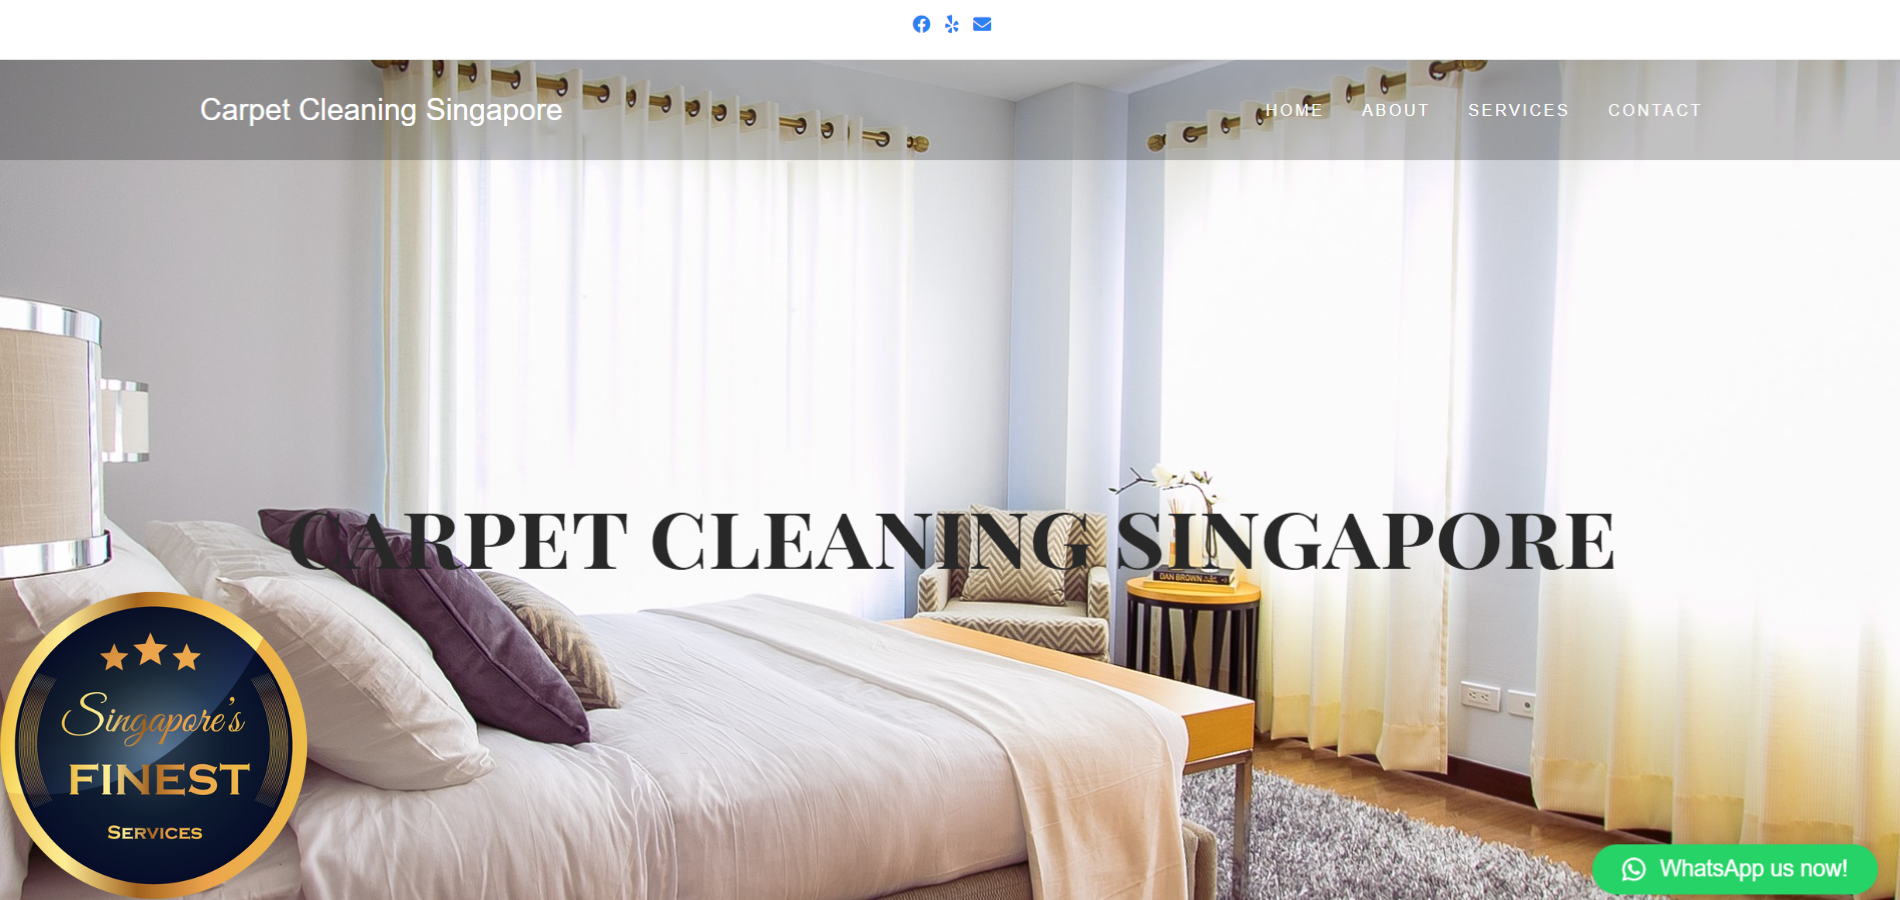 The Finest Carpet Cleaning Services in Singapore